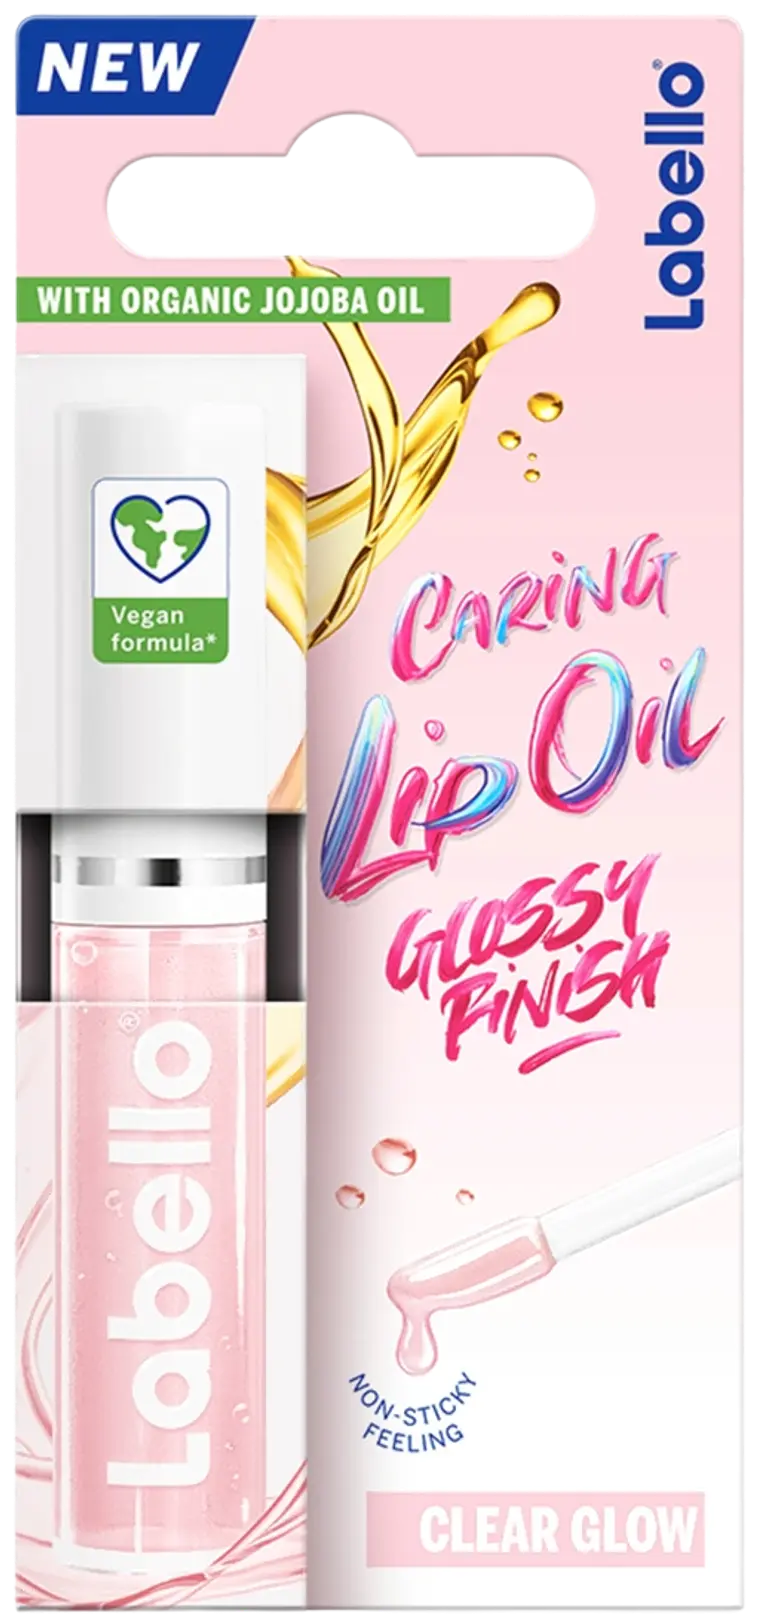 Labello 5,5ml Caring Lip Oil Clear Glow -huuliöljy